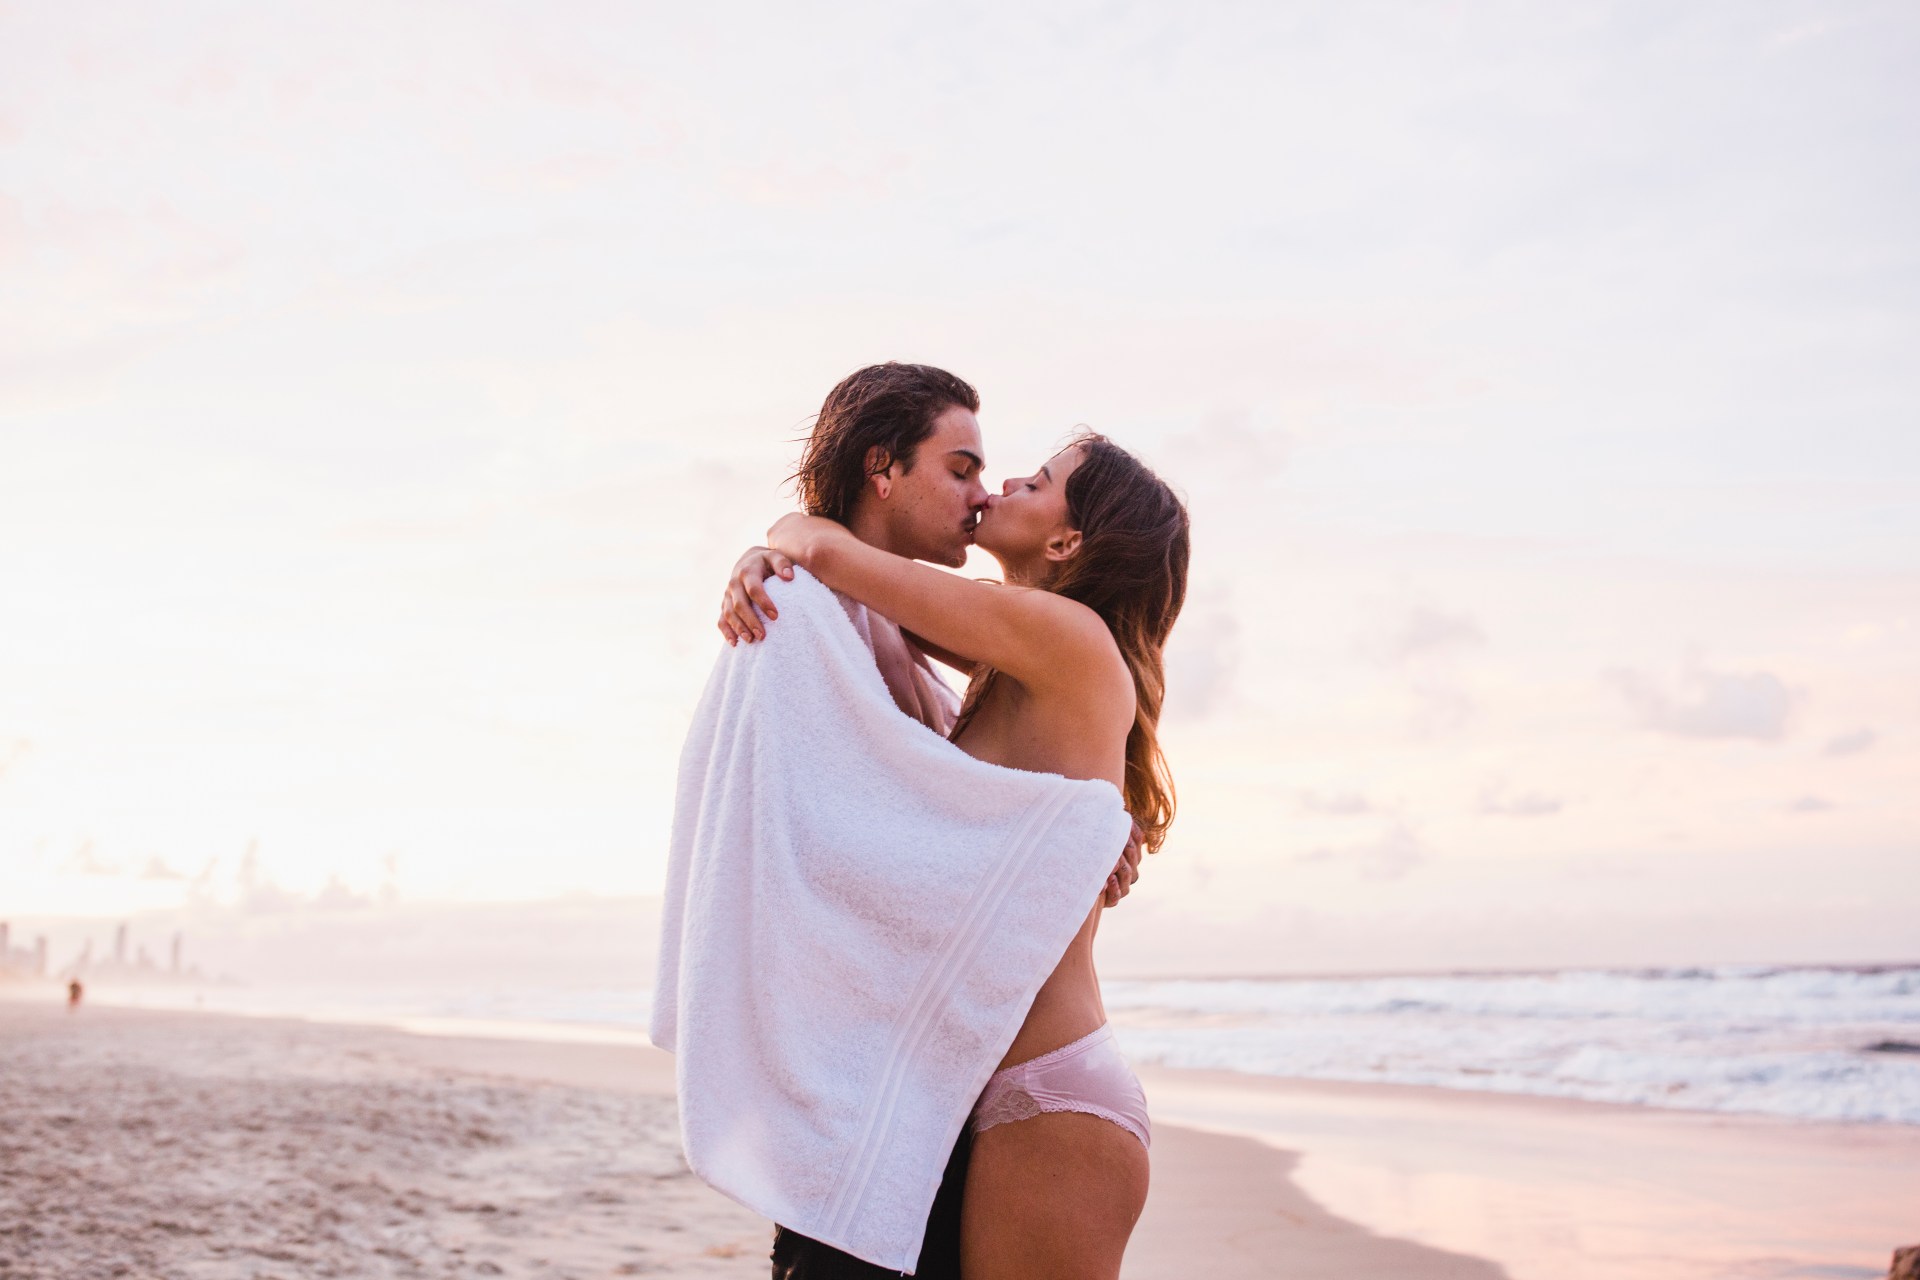 Everything You Need To Know About Love Based On Your Zodiac Sign